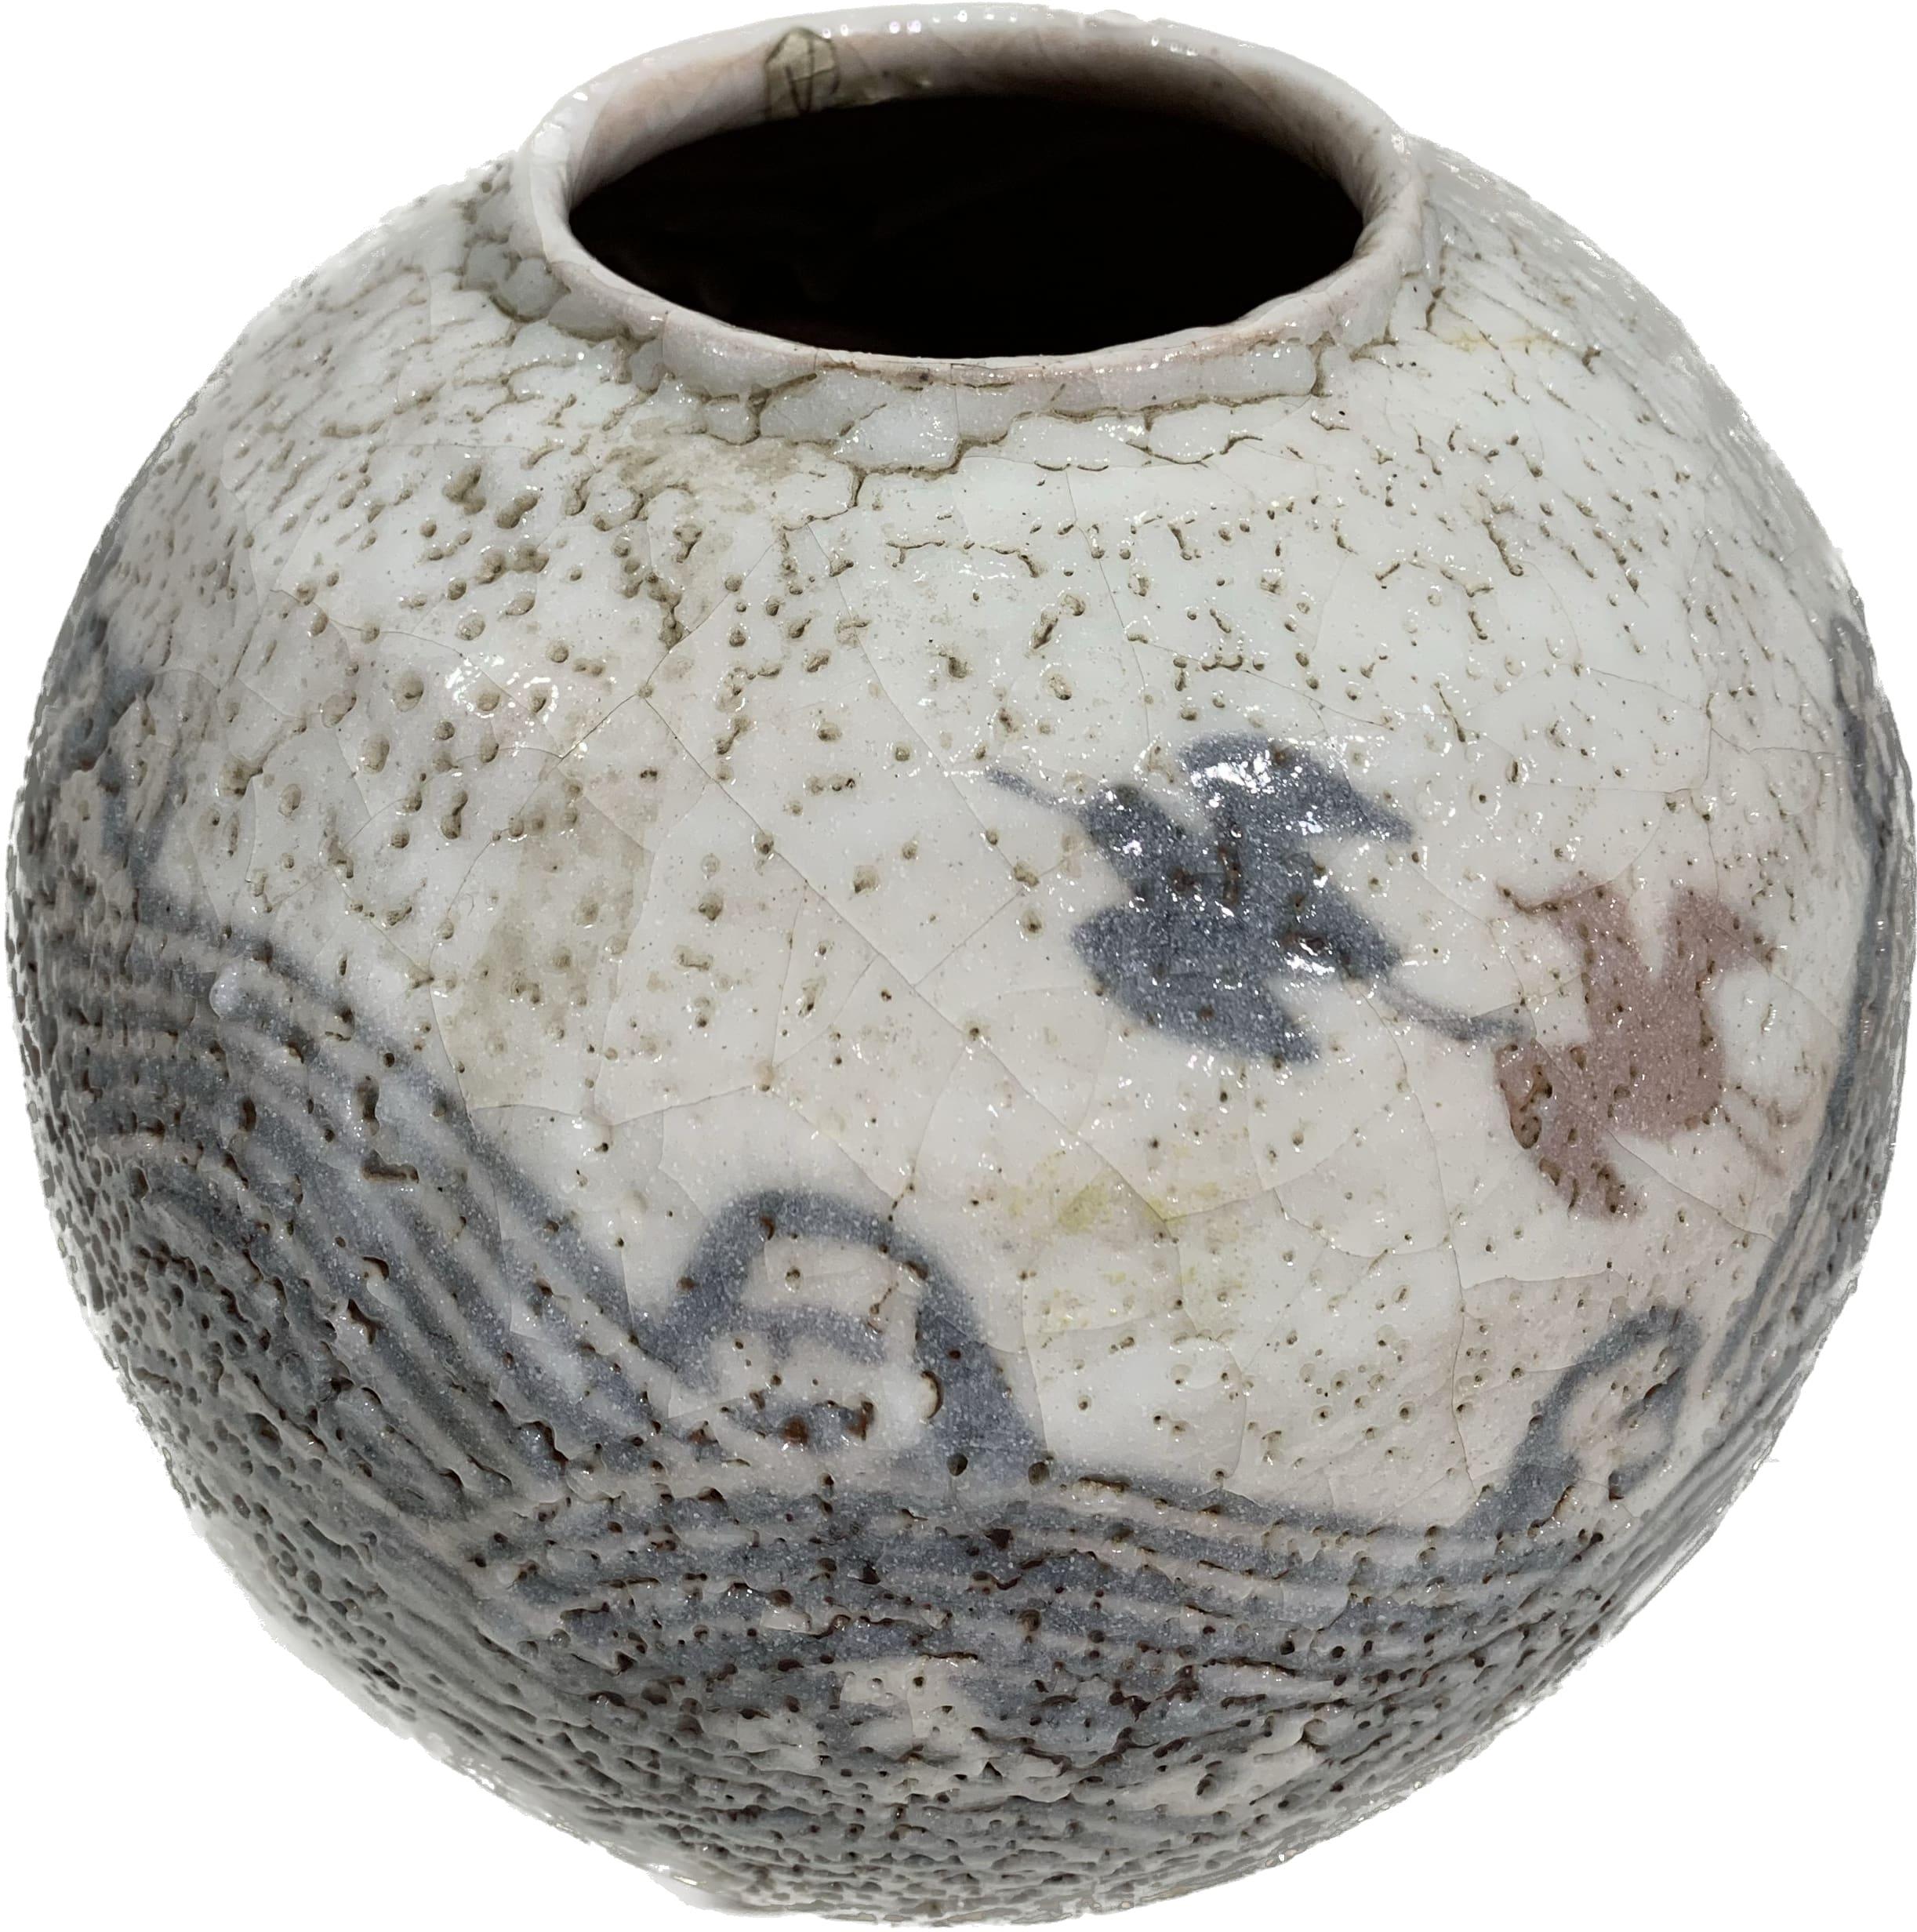 Gorgeous bowl shaped vase in glazed stoneware that is crackled.
It is made with beautiful nuances of grey, blue, and earth colors representing a natural scenery of seagulls flying over waves.
The opening is 10cm wide. It is punched ( with a «